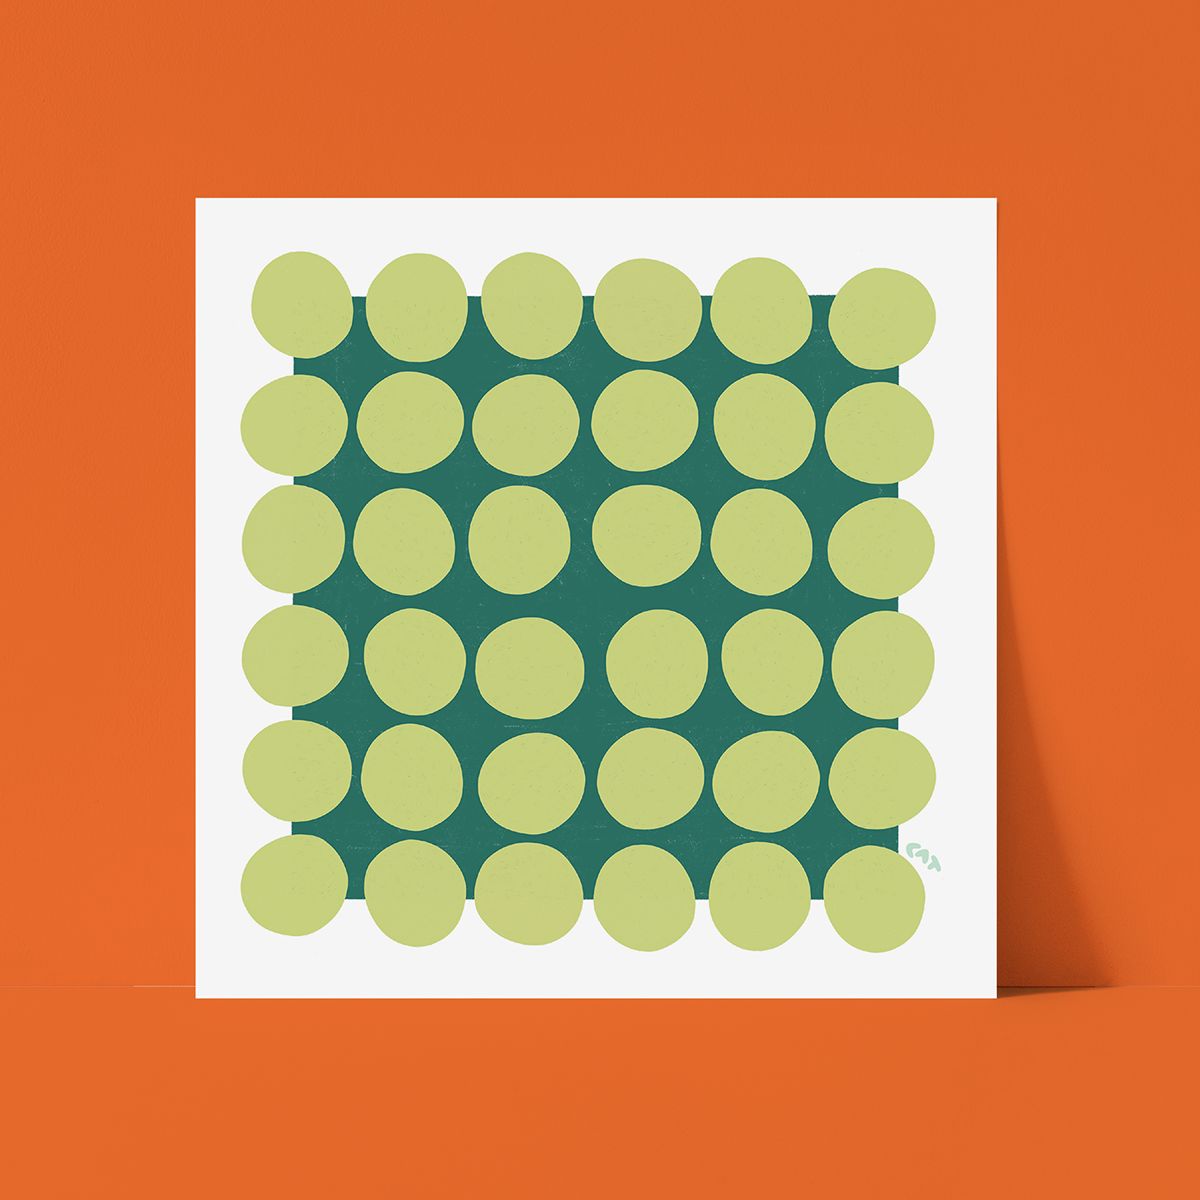 White unframed print of a dark green square with a grid of light green polka dots on top.